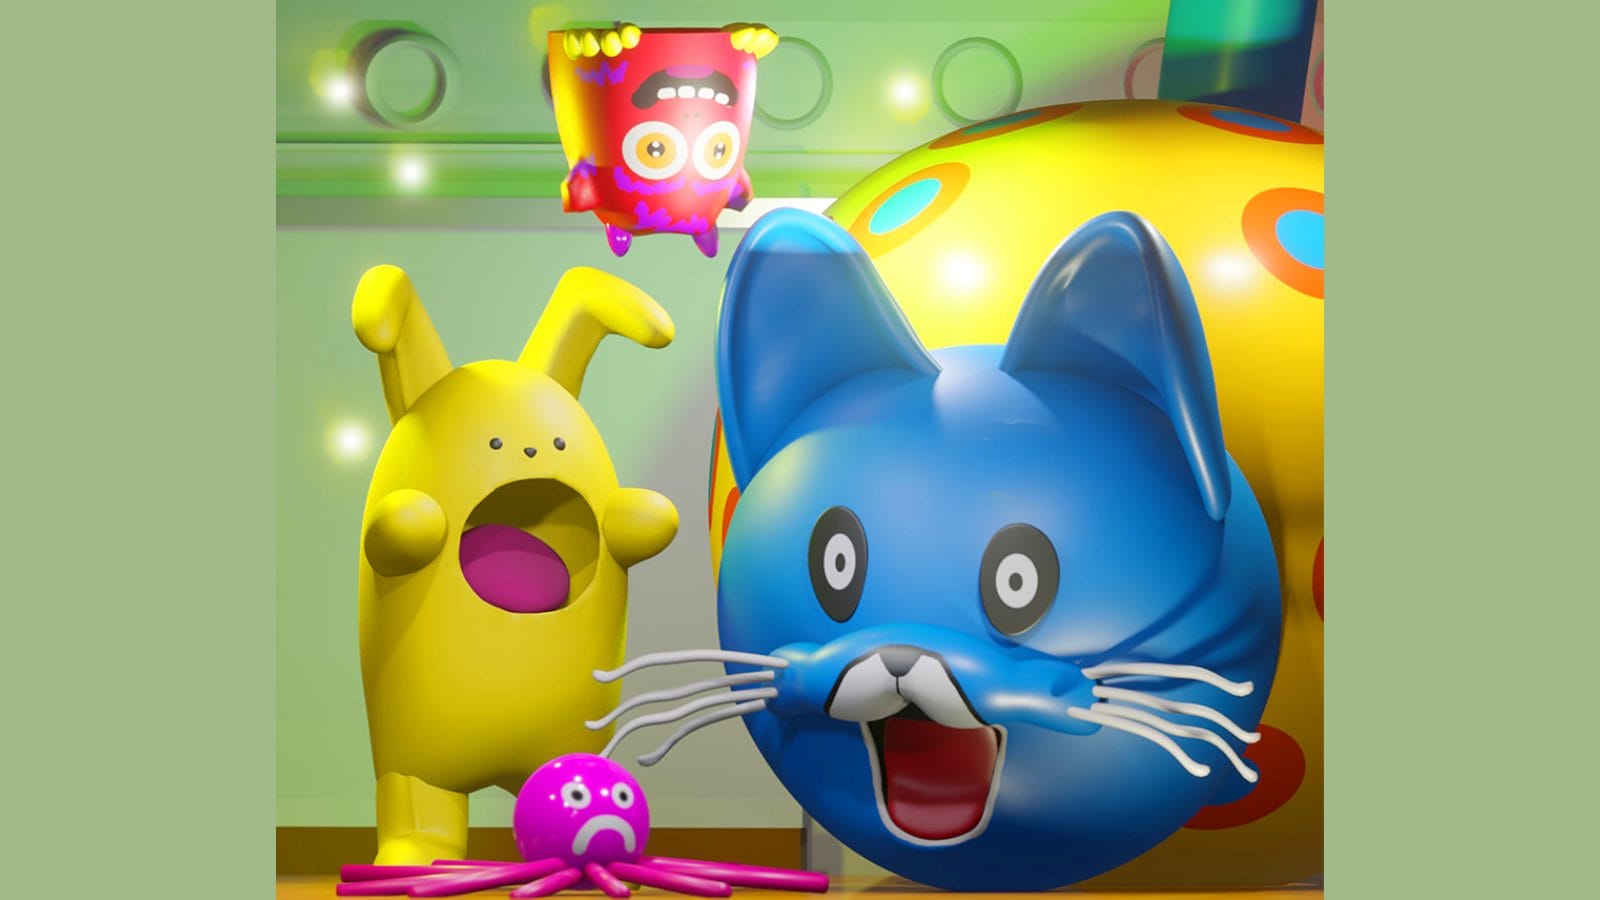 A collection of brightly coloured inflatable monsters including a yellow bunny and a blue cat